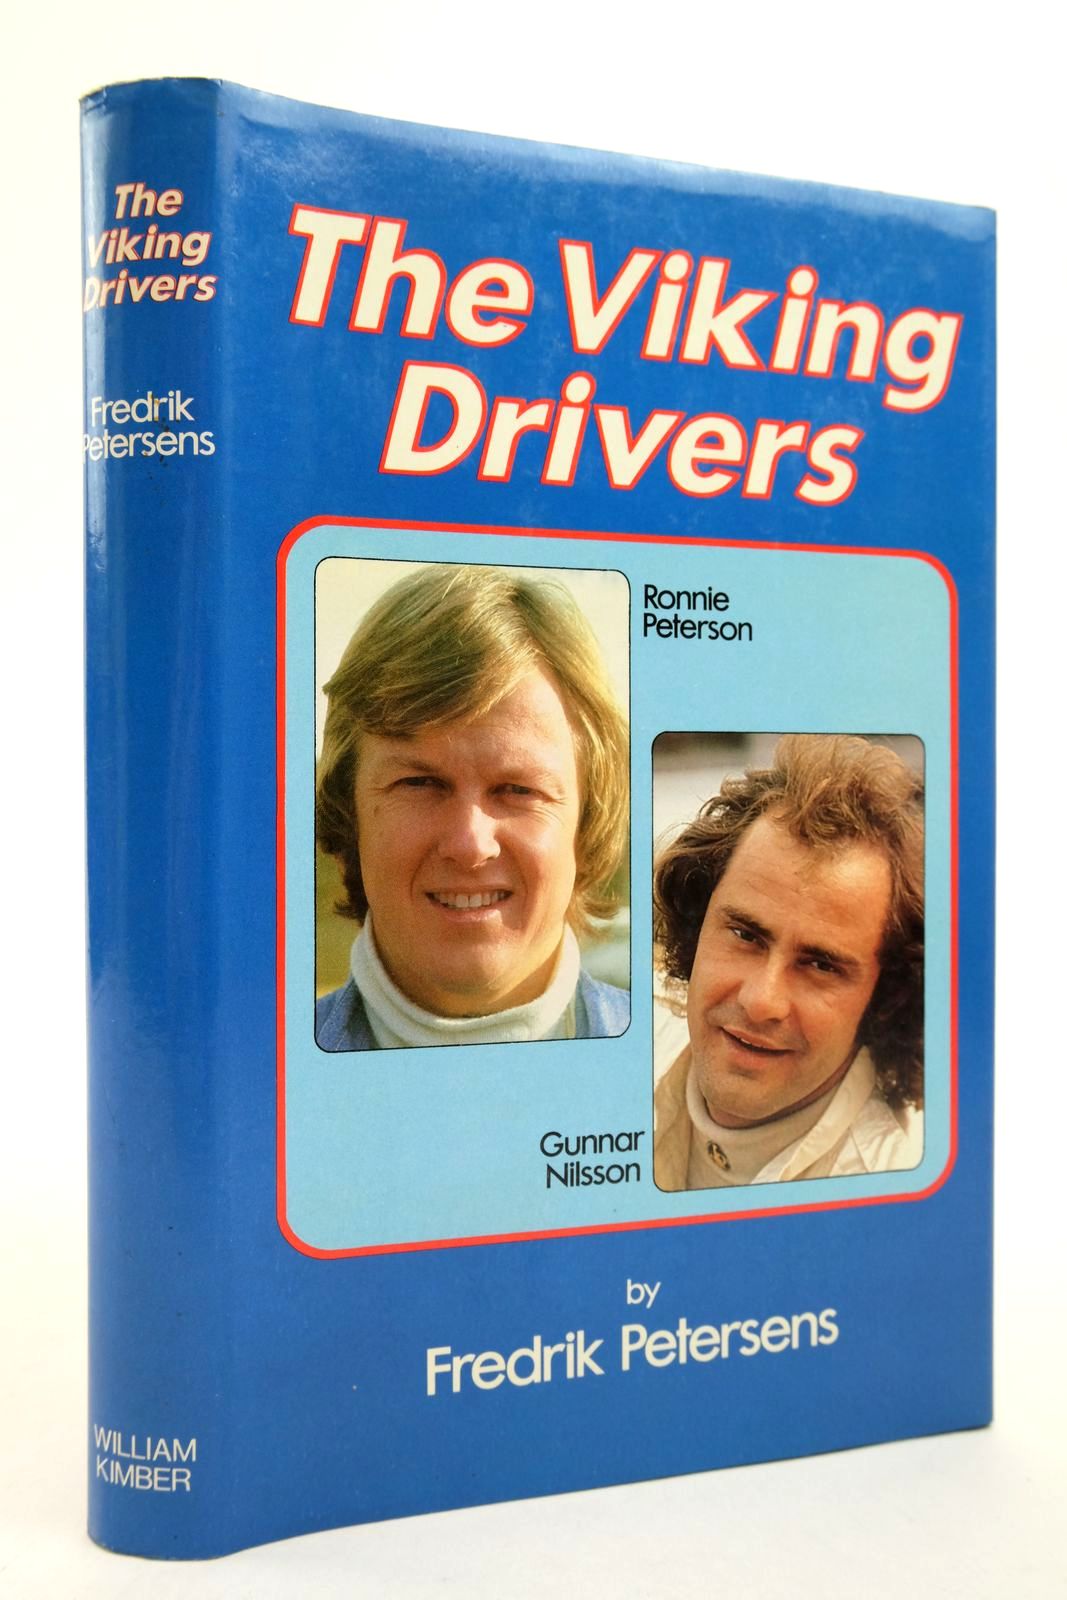 Photo of THE VIKING DRIVERS written by Petersens, Fredrik published by William Kimber (STOCK CODE: 2139926)  for sale by Stella & Rose's Books